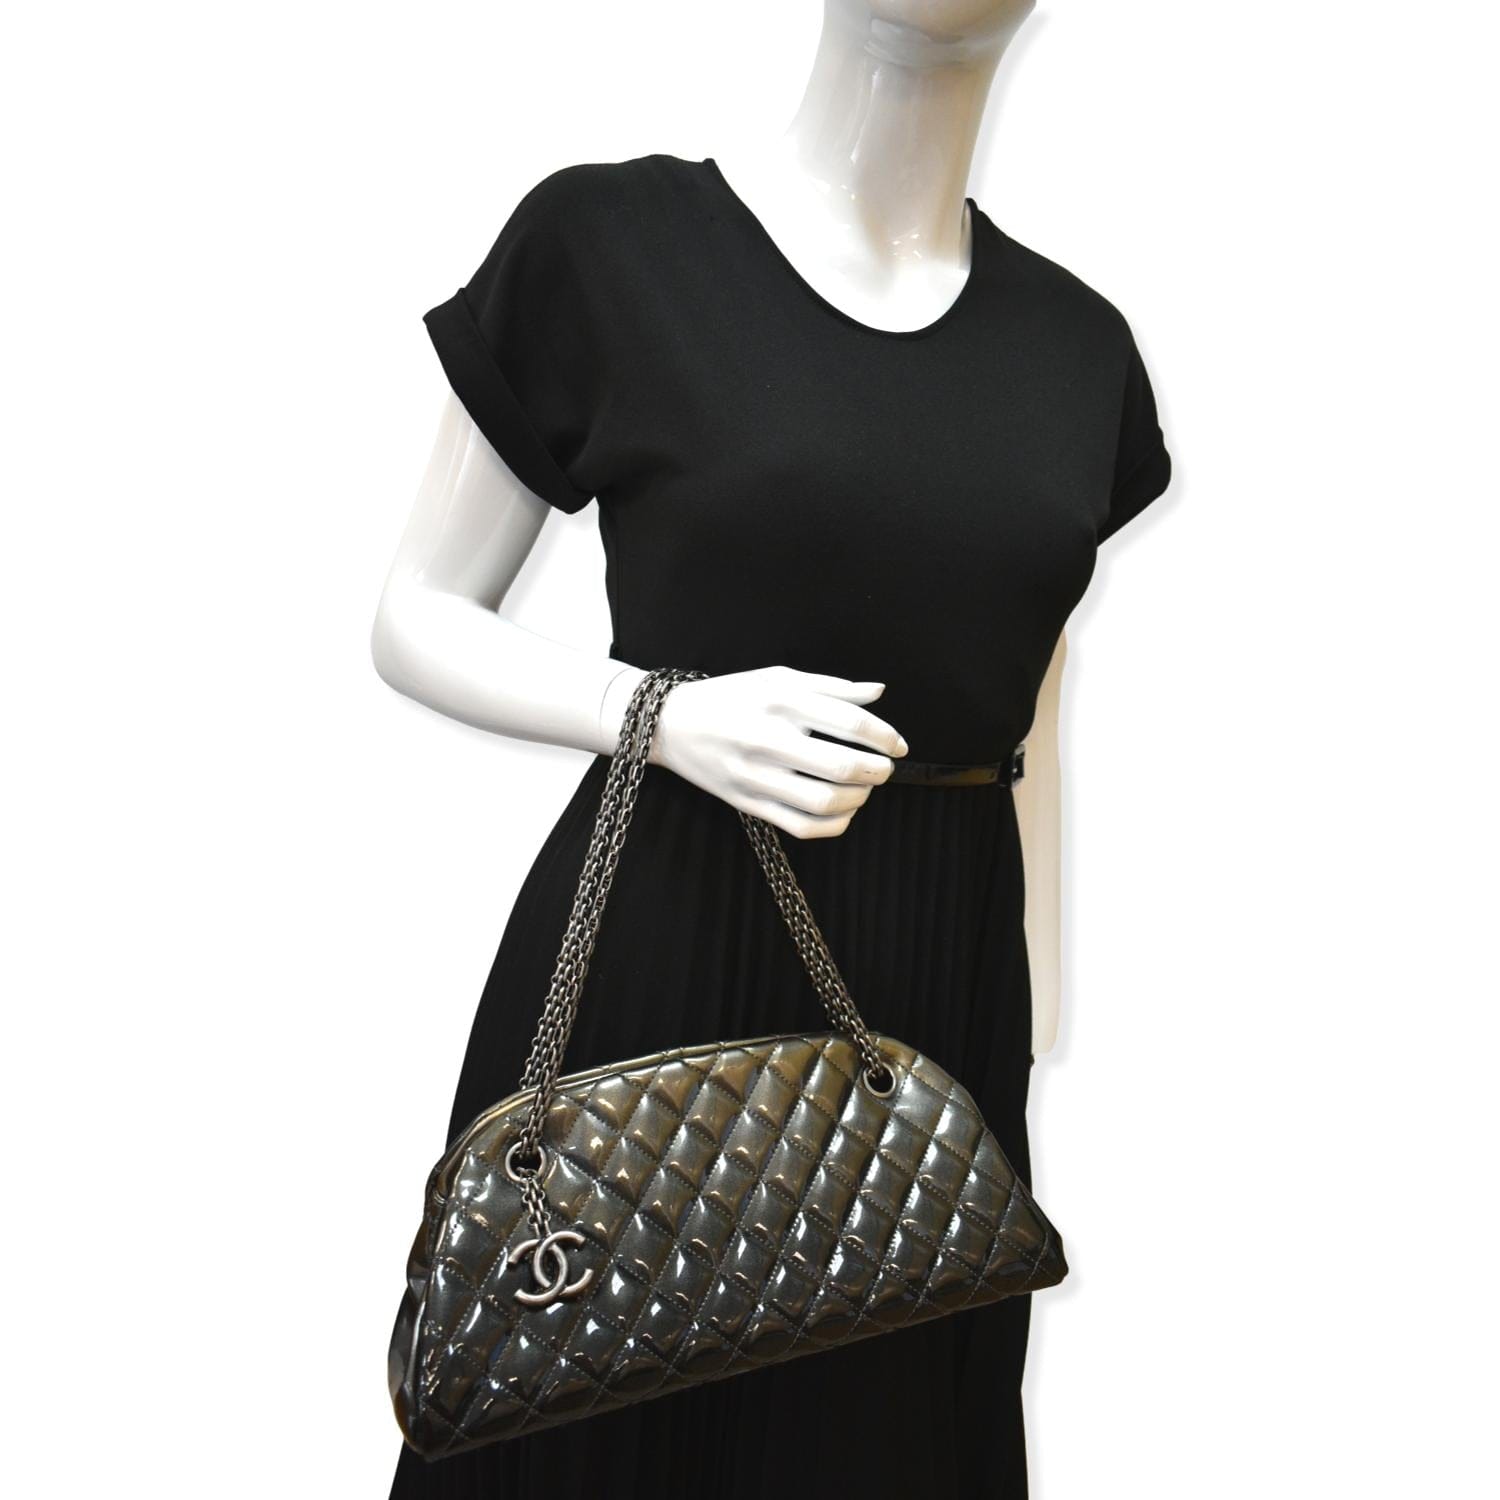 Just Mademoiselle Stitch Bowling Bag, Chanel (Lot 209 - The Signature  Summer AuctionJun 12, 2021, 9:00am)